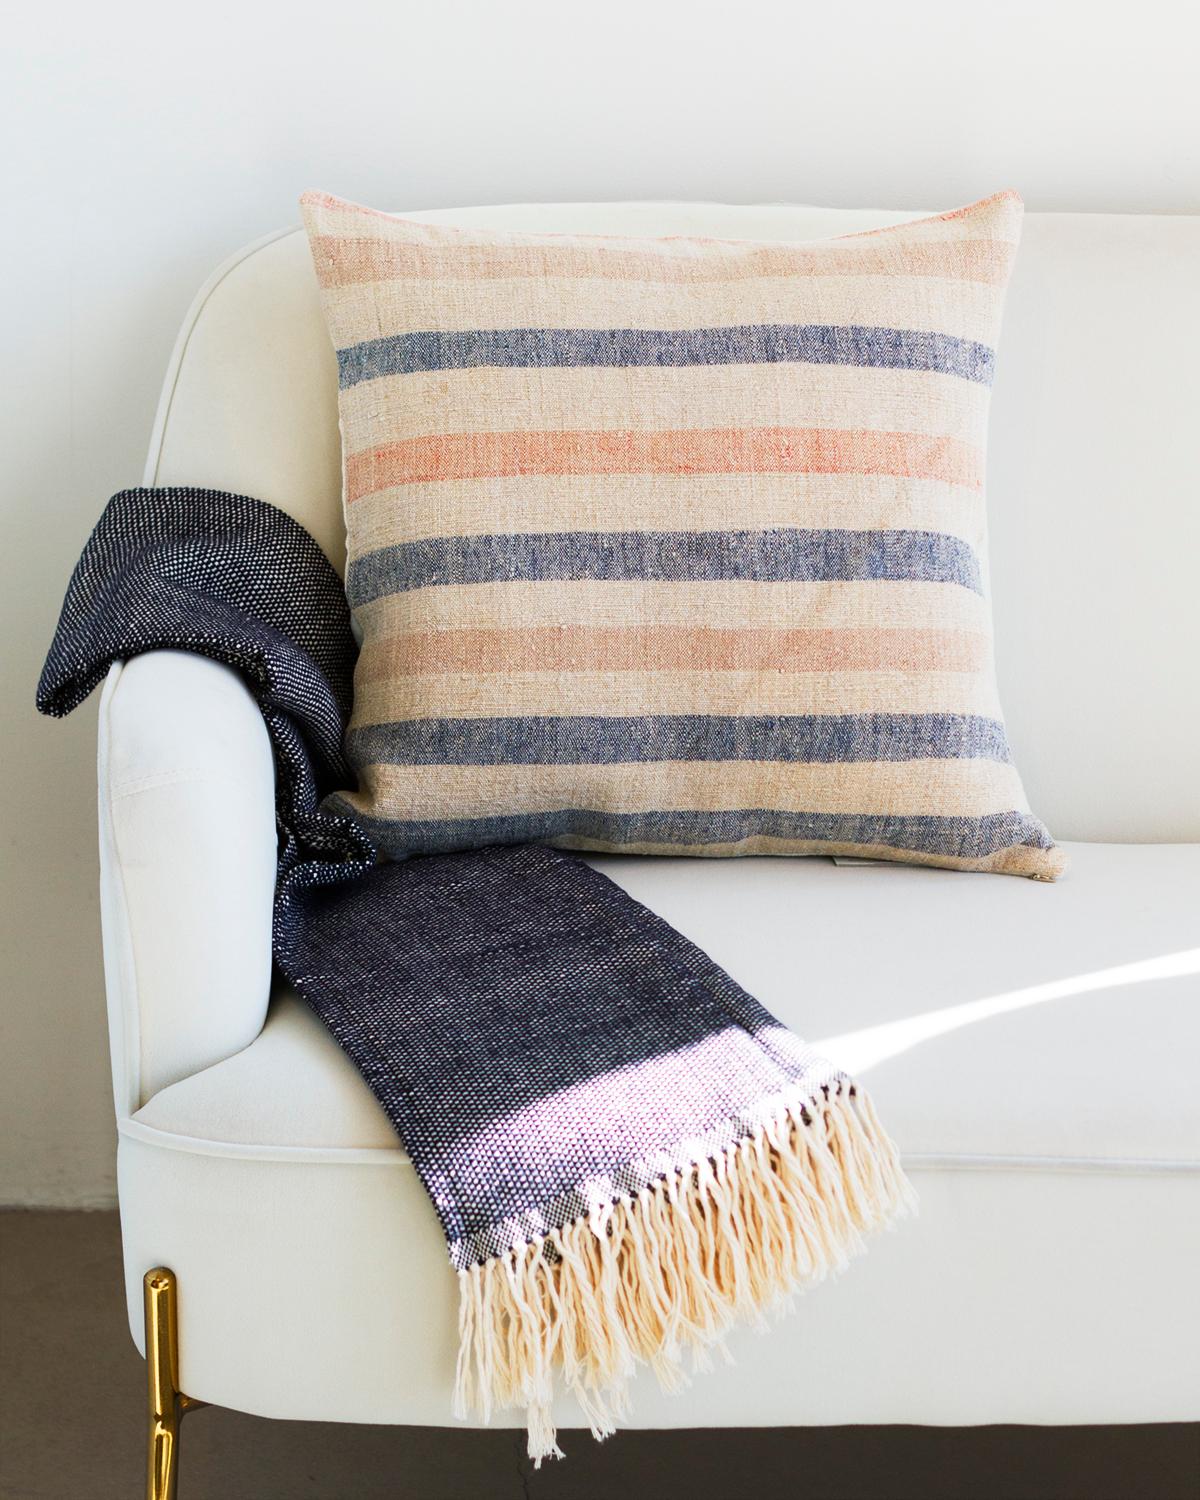 One of a kind vintage linen throw pillows to beautify your home
A hundred years ago these fabrics used to be cereal sacks in Northern Portugal. Now they get rediscovered and transformed into a rare collectible.
 
This Matilde Blue and Pink Stripe